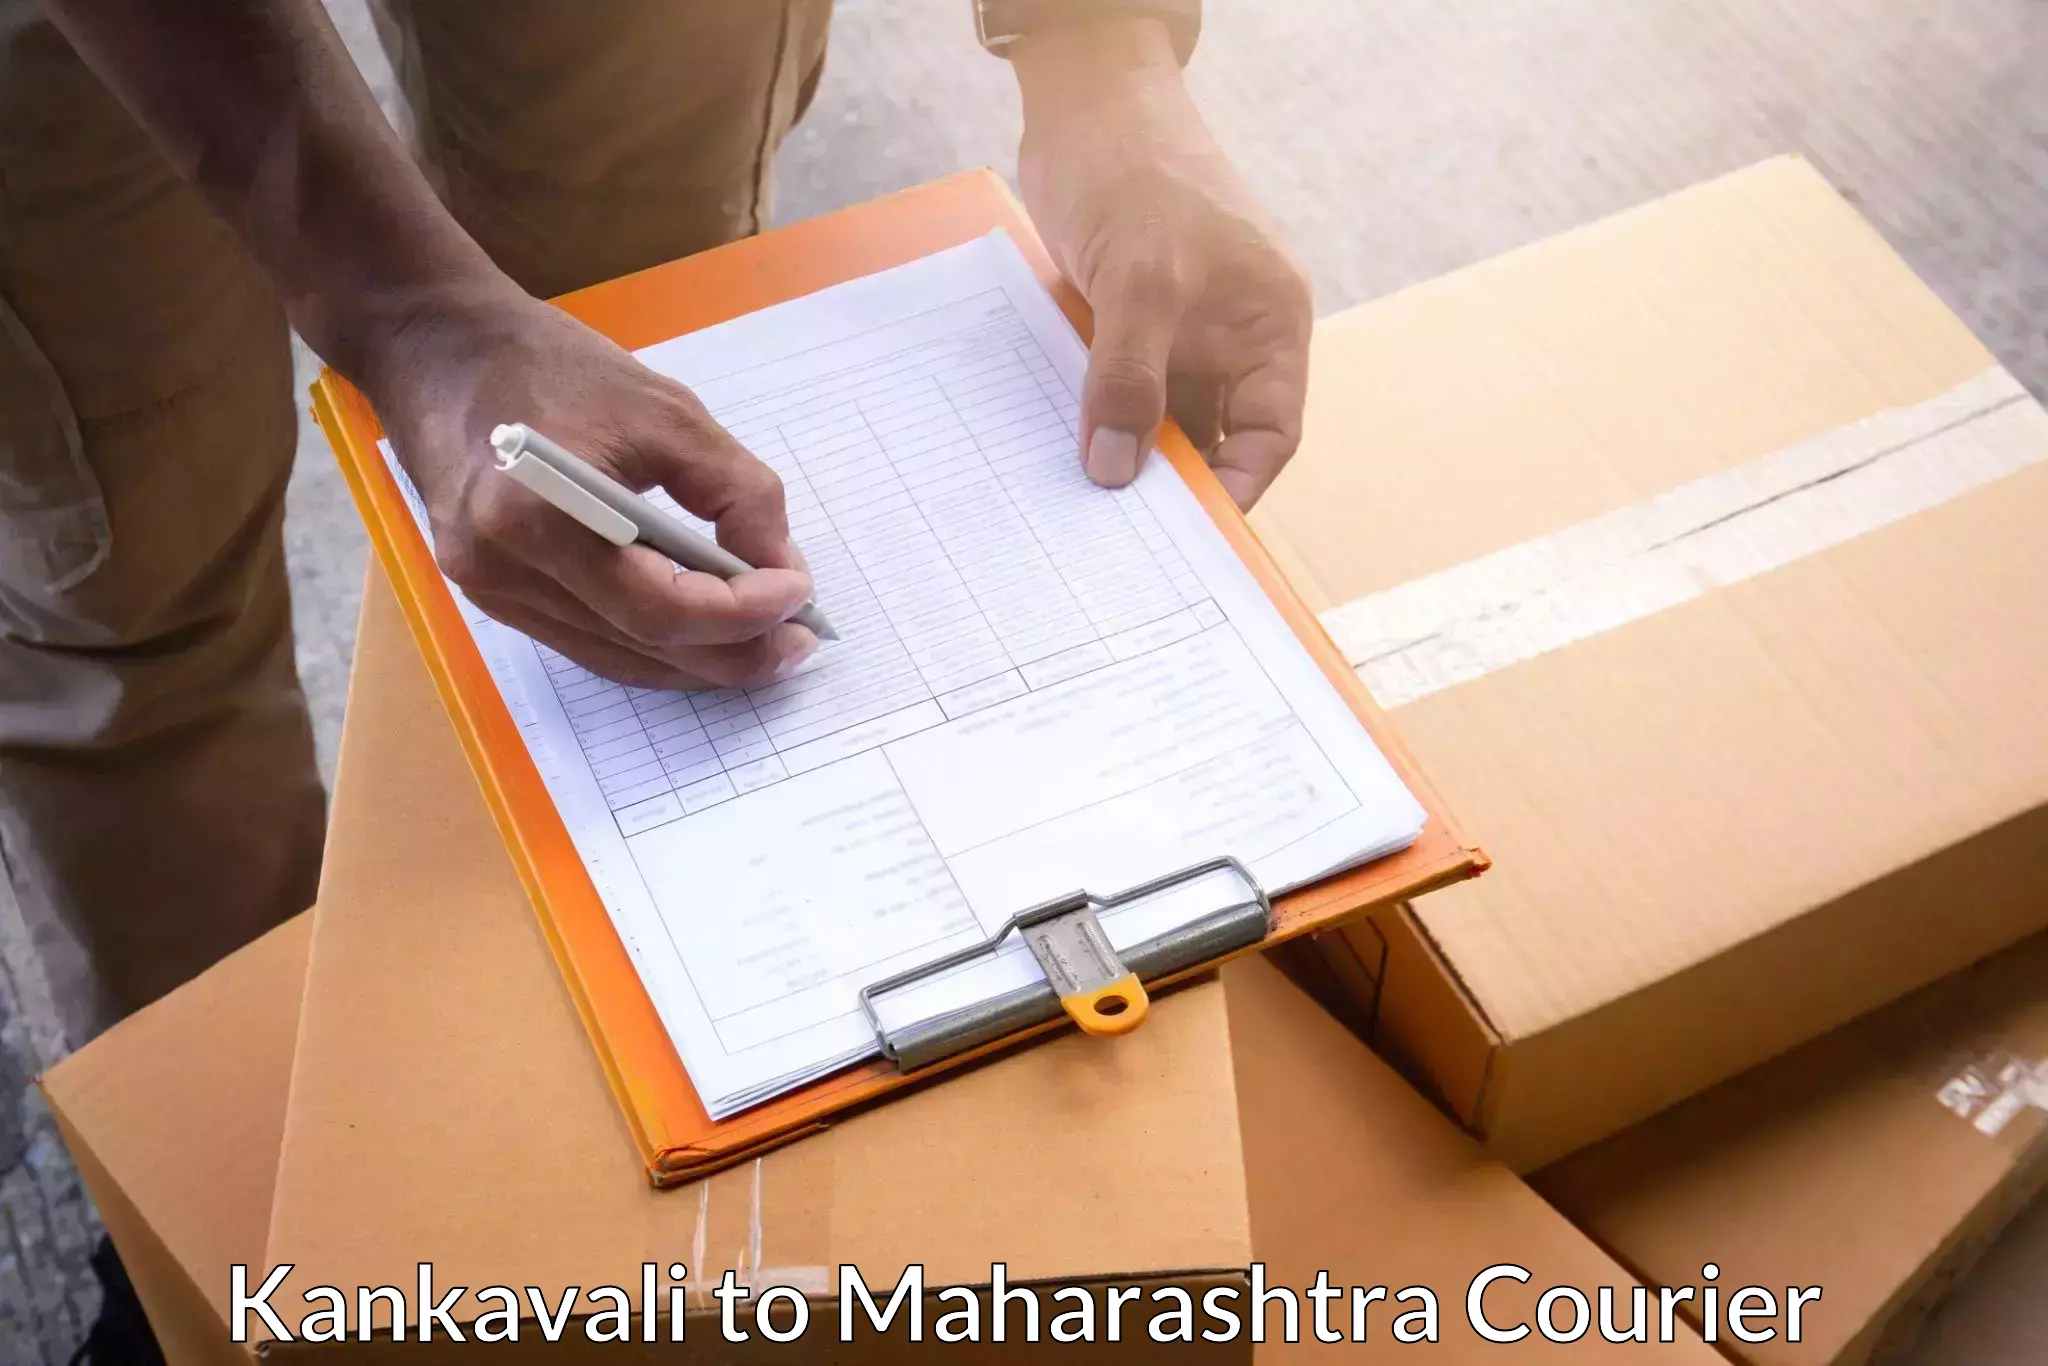 Package delivery network Kankavali to Mumbai Port